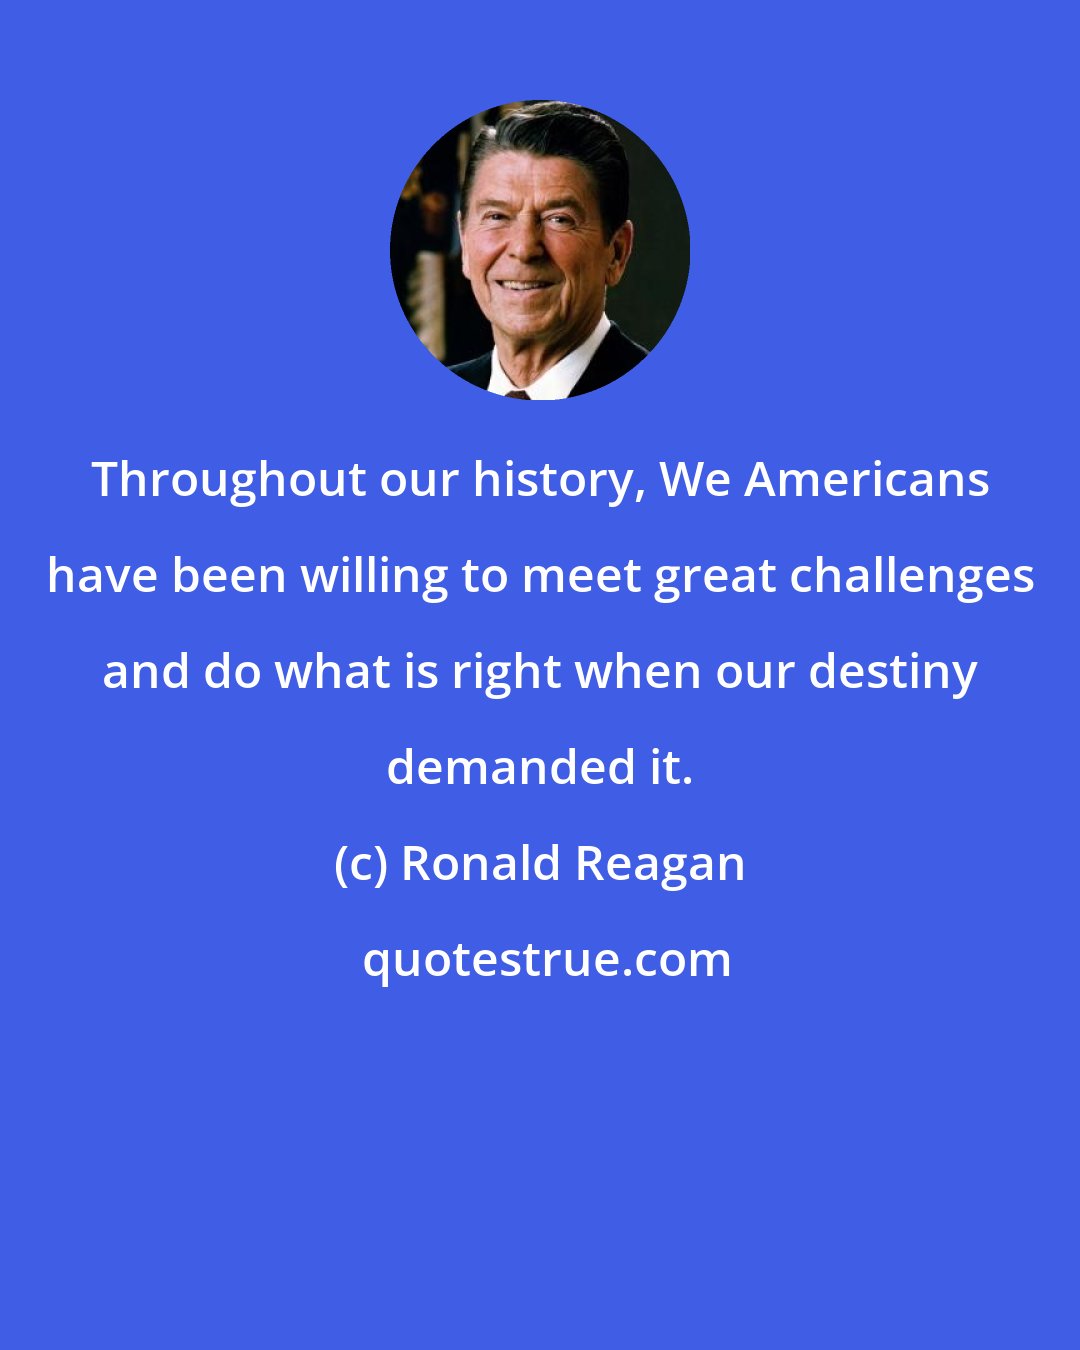 Ronald Reagan: Throughout our history, We Americans have been willing to meet great challenges and do what is right when our destiny demanded it.